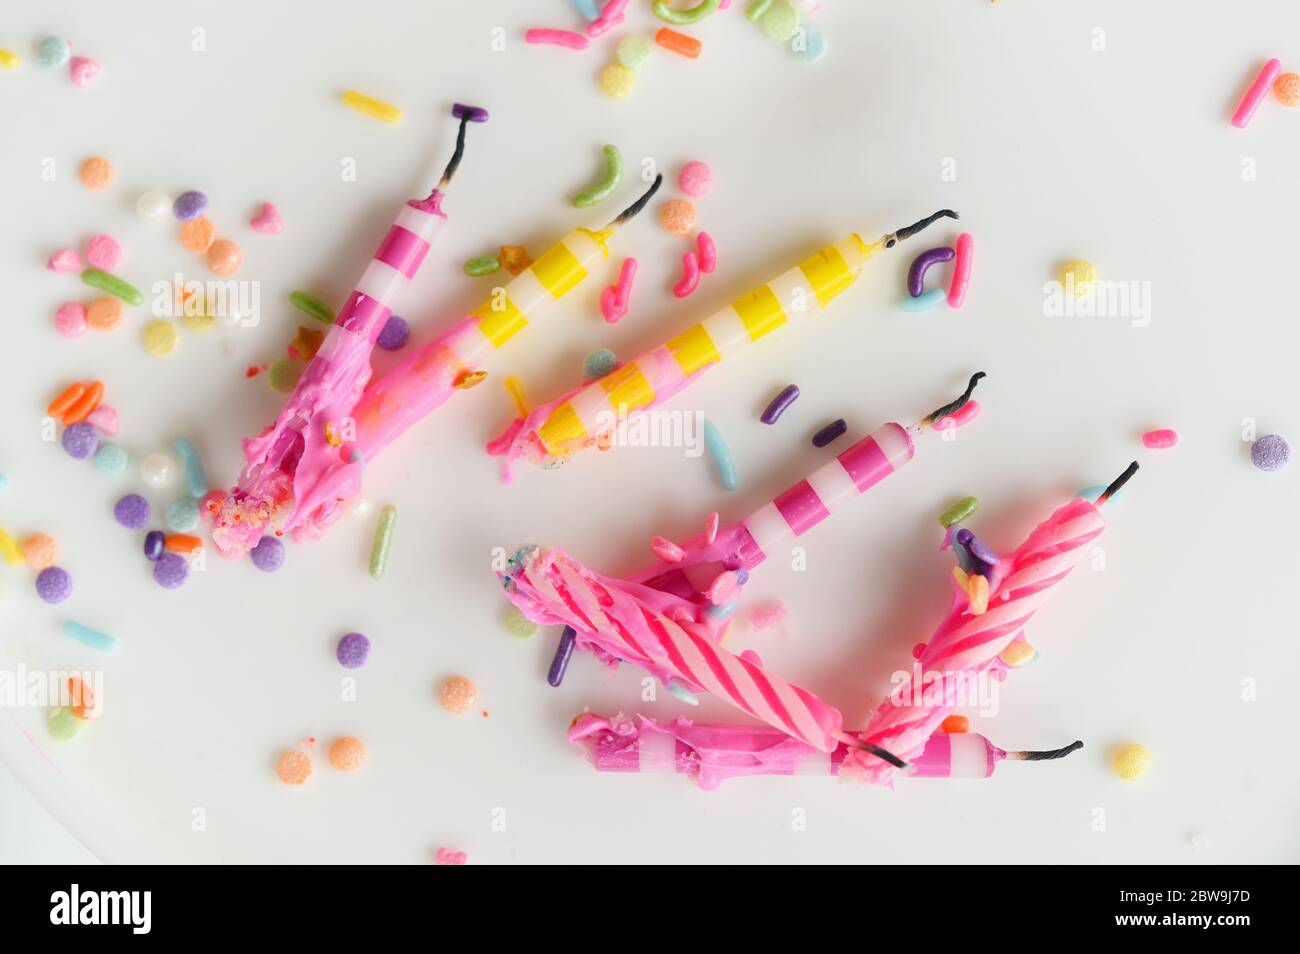 Burnt out birthday candles Stock Photo